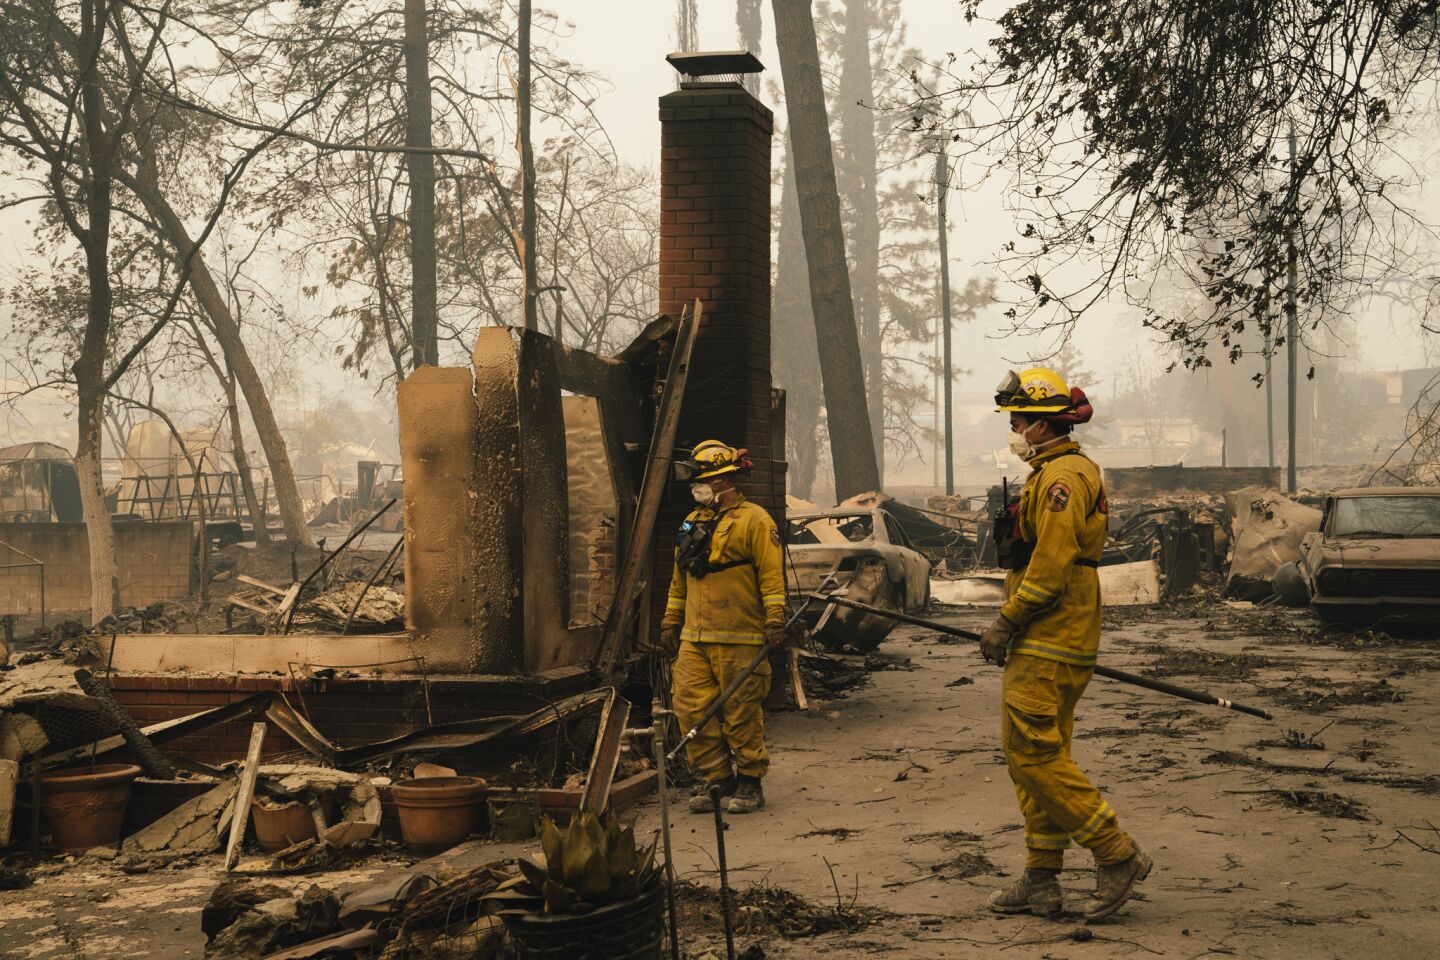 Fire crews put out hot spots in Paradise, Calif.